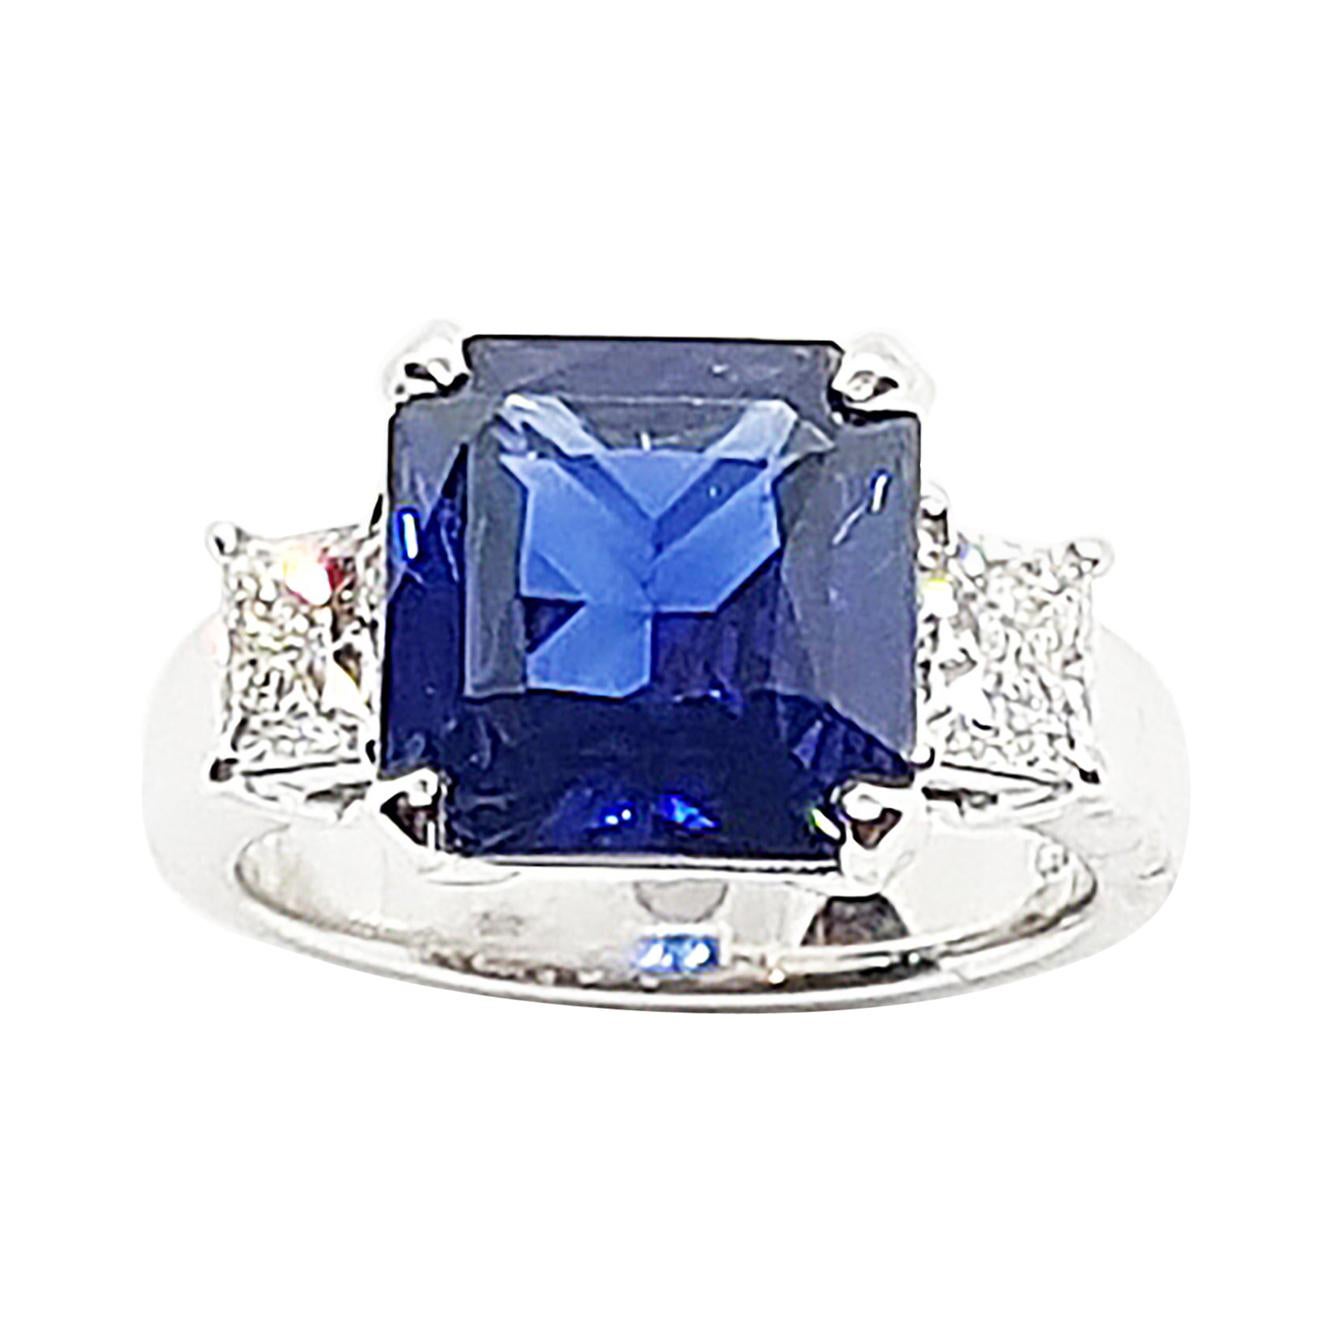 GIA Certified 4 Cts Royal Blue Sapphire with Diamond Ring in 18k White Gold